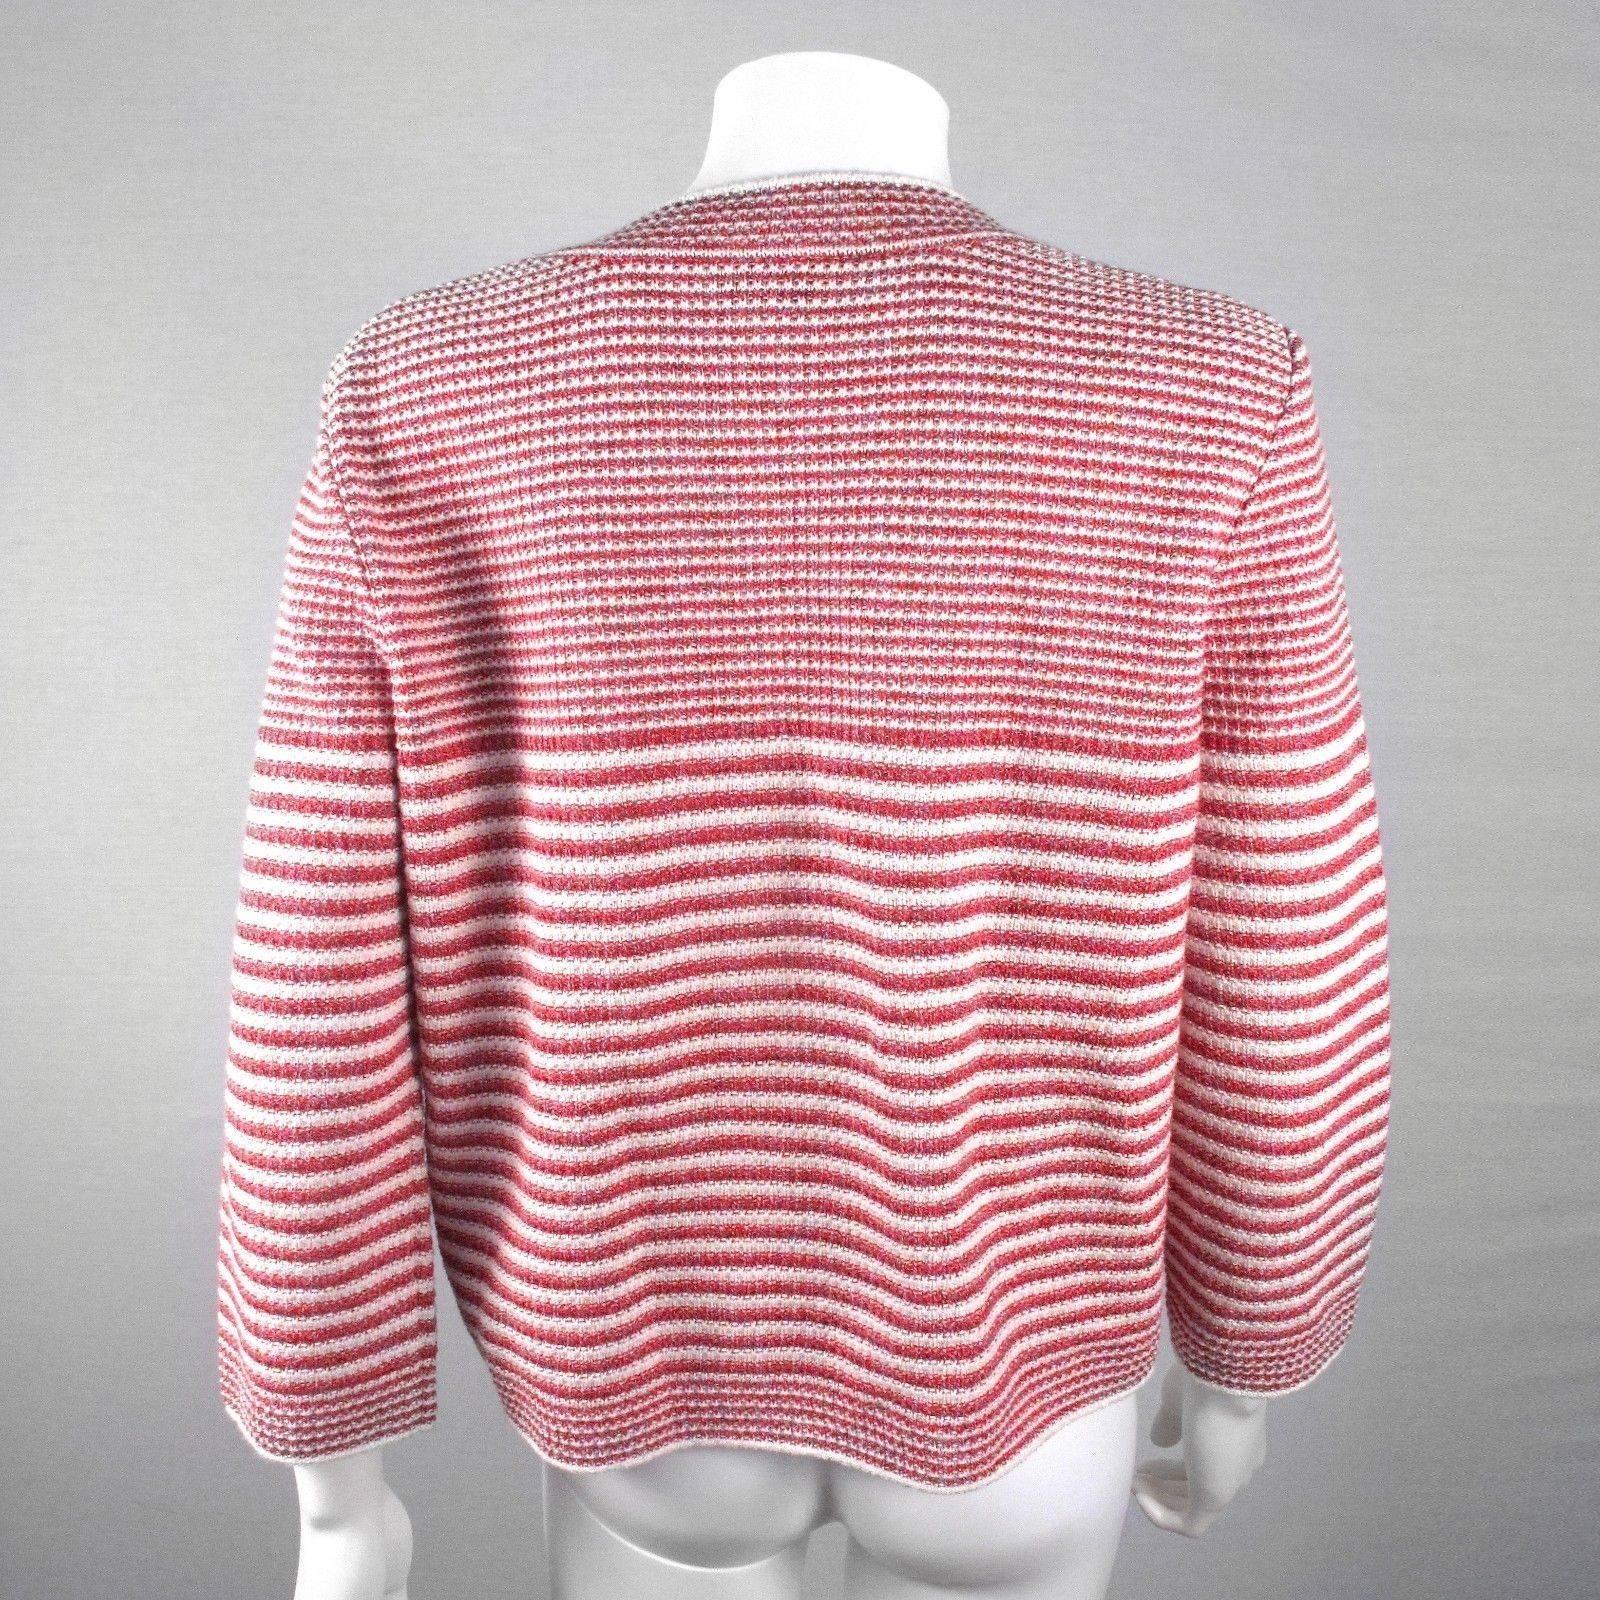 Chanel - 2014 Striped Cardigan Jacket

with Pearl Buttons

Tag Size:  44 - US 10 / 12

Color:   Red / White

Material: 41% Paper - 31% Cotton - 28% Silk 

------------------------------------------------------------

Details:

-